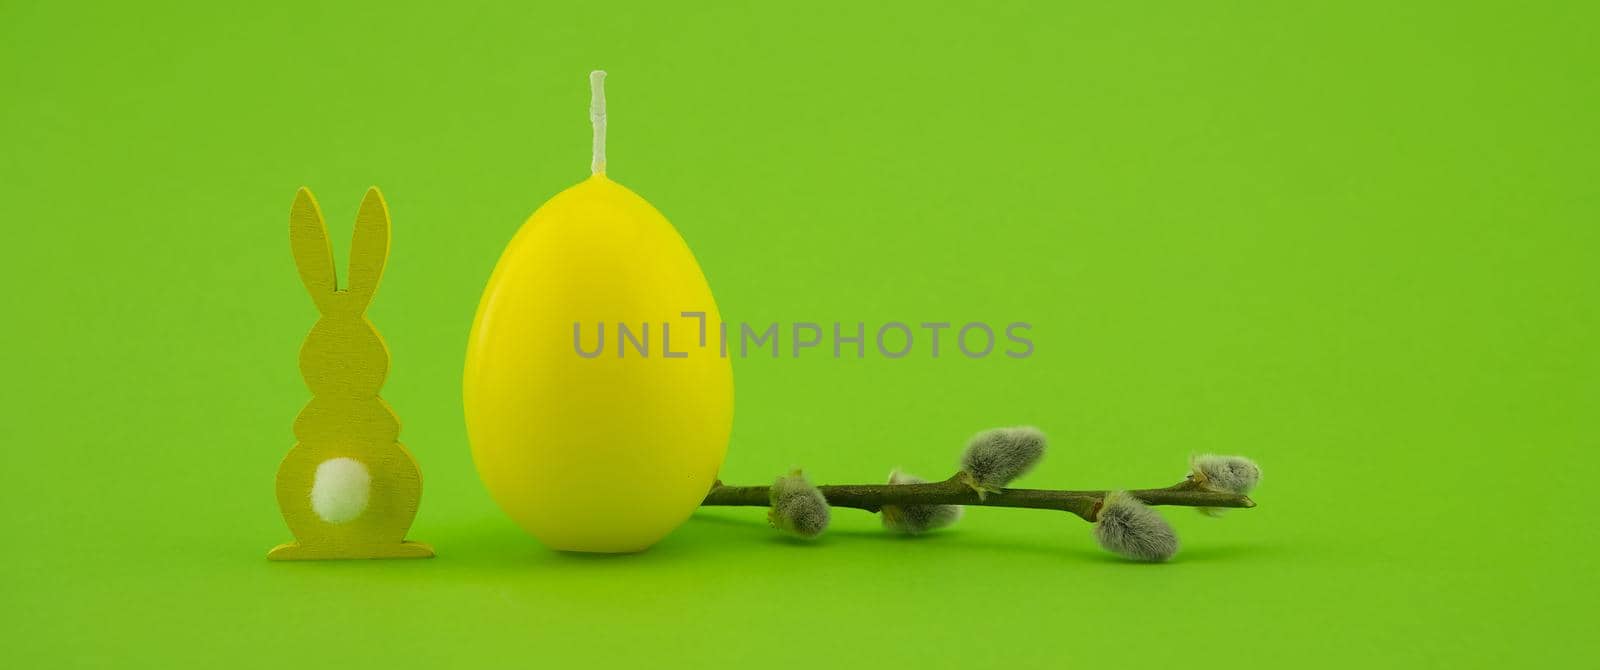 Minimalistic style Easter banner with yellow egg shaped candle, pussy willow branch and Easter Bunny figure over a green background with free copy space for your text